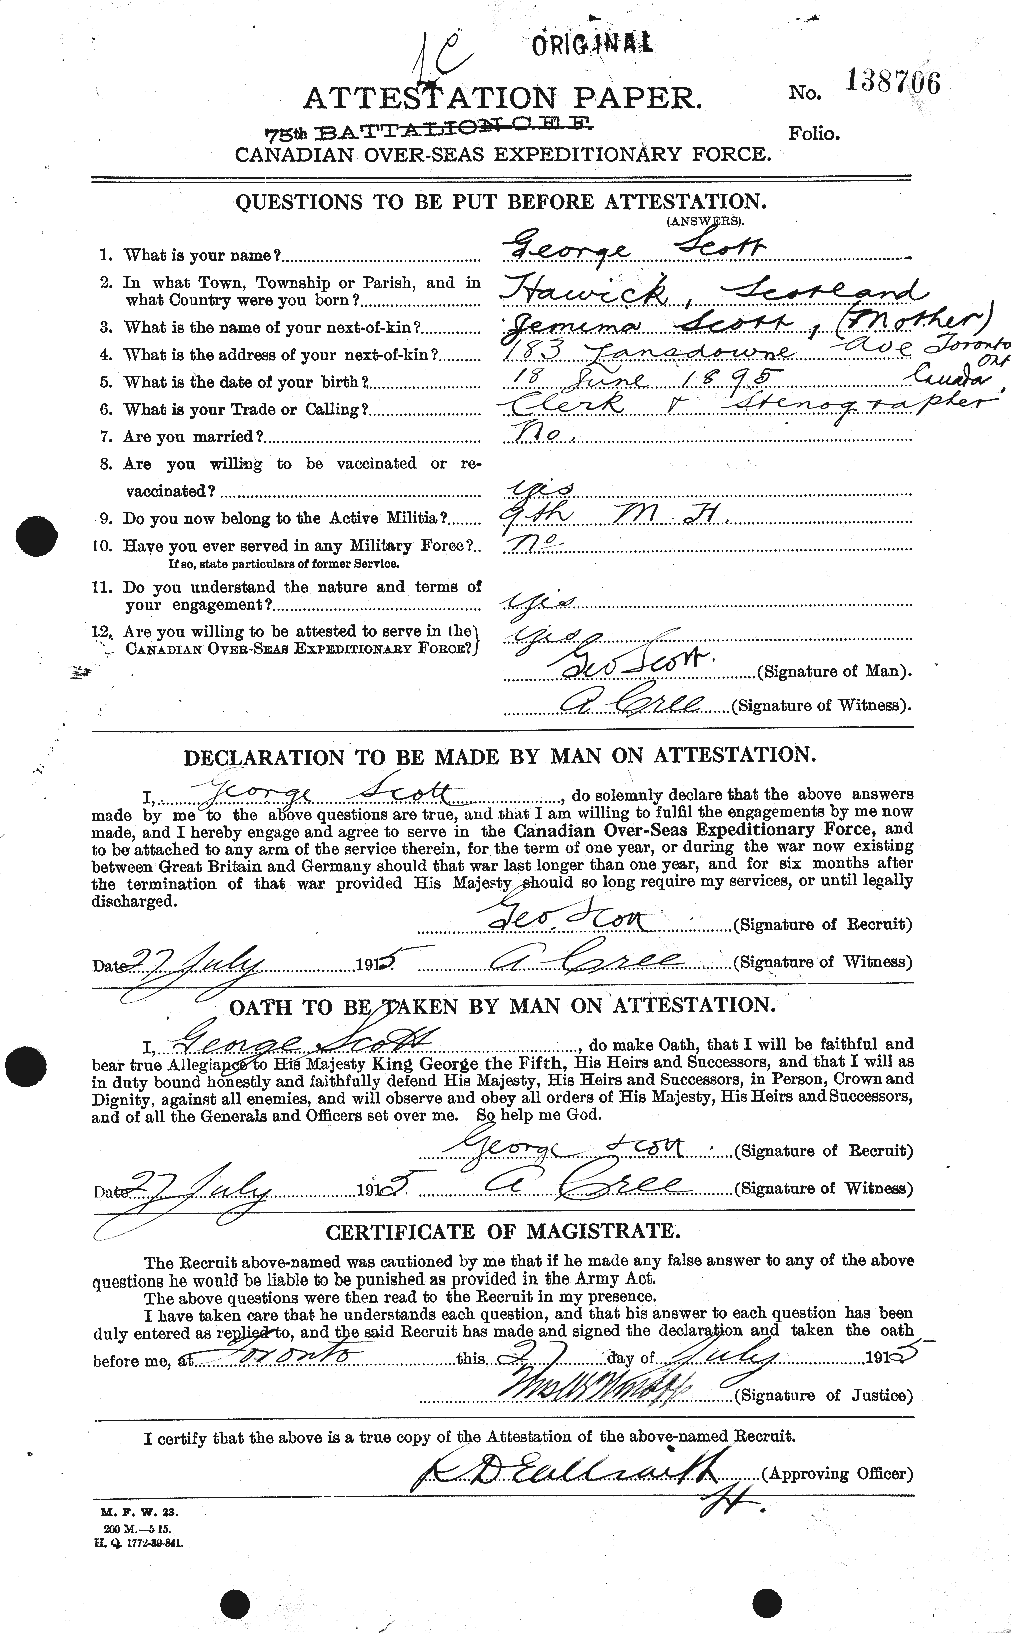 Personnel Records of the First World War - CEF 083586a